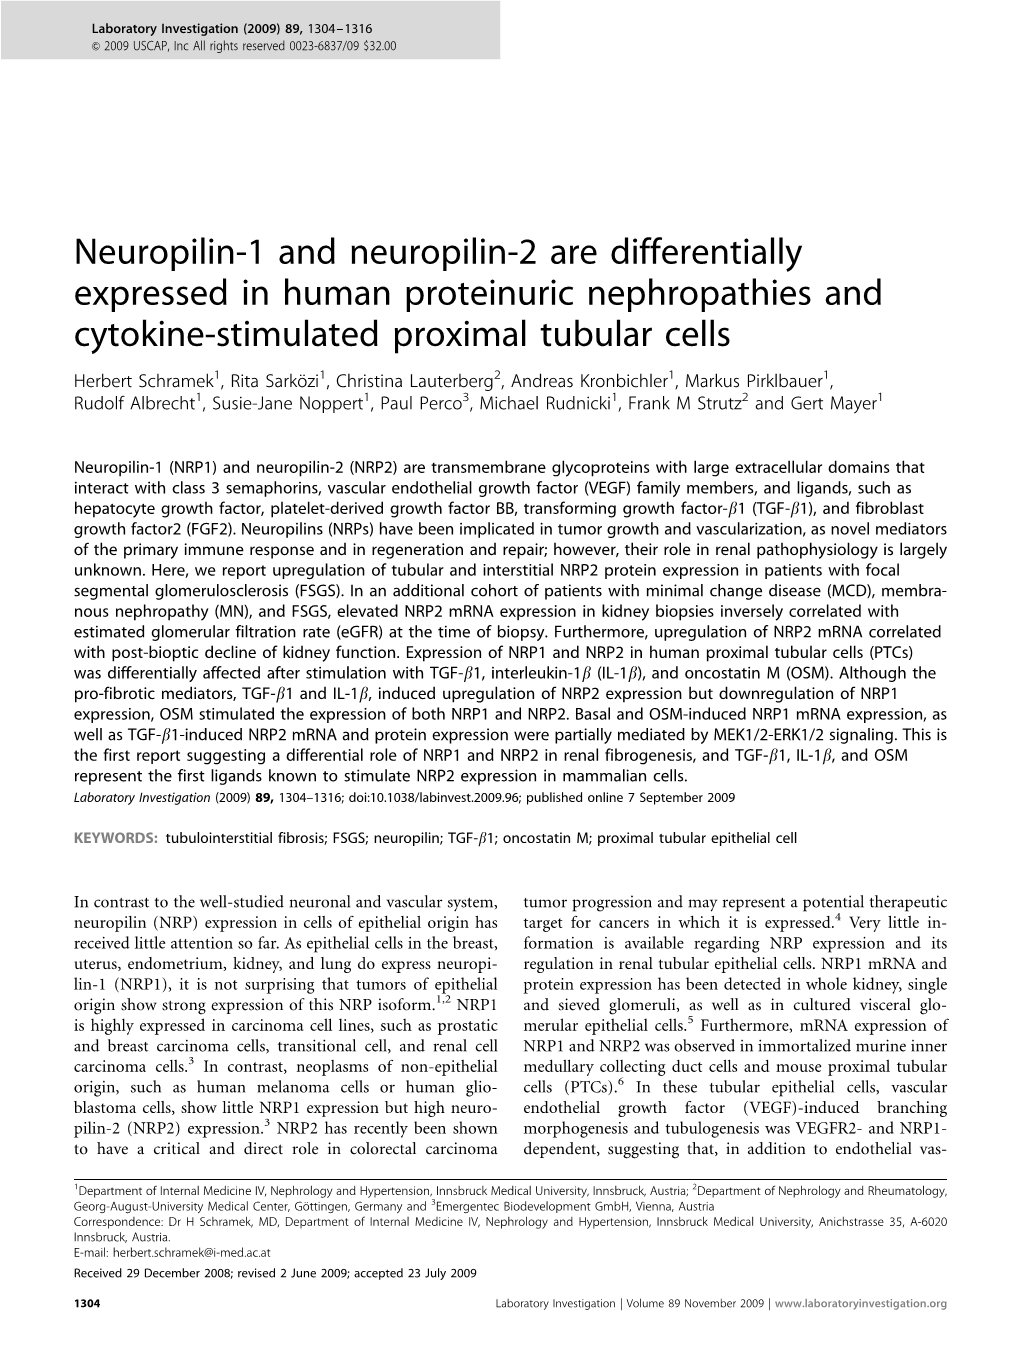 Neuropilin-1 and Neuropilin-2 Are Differentially Expressed in Human